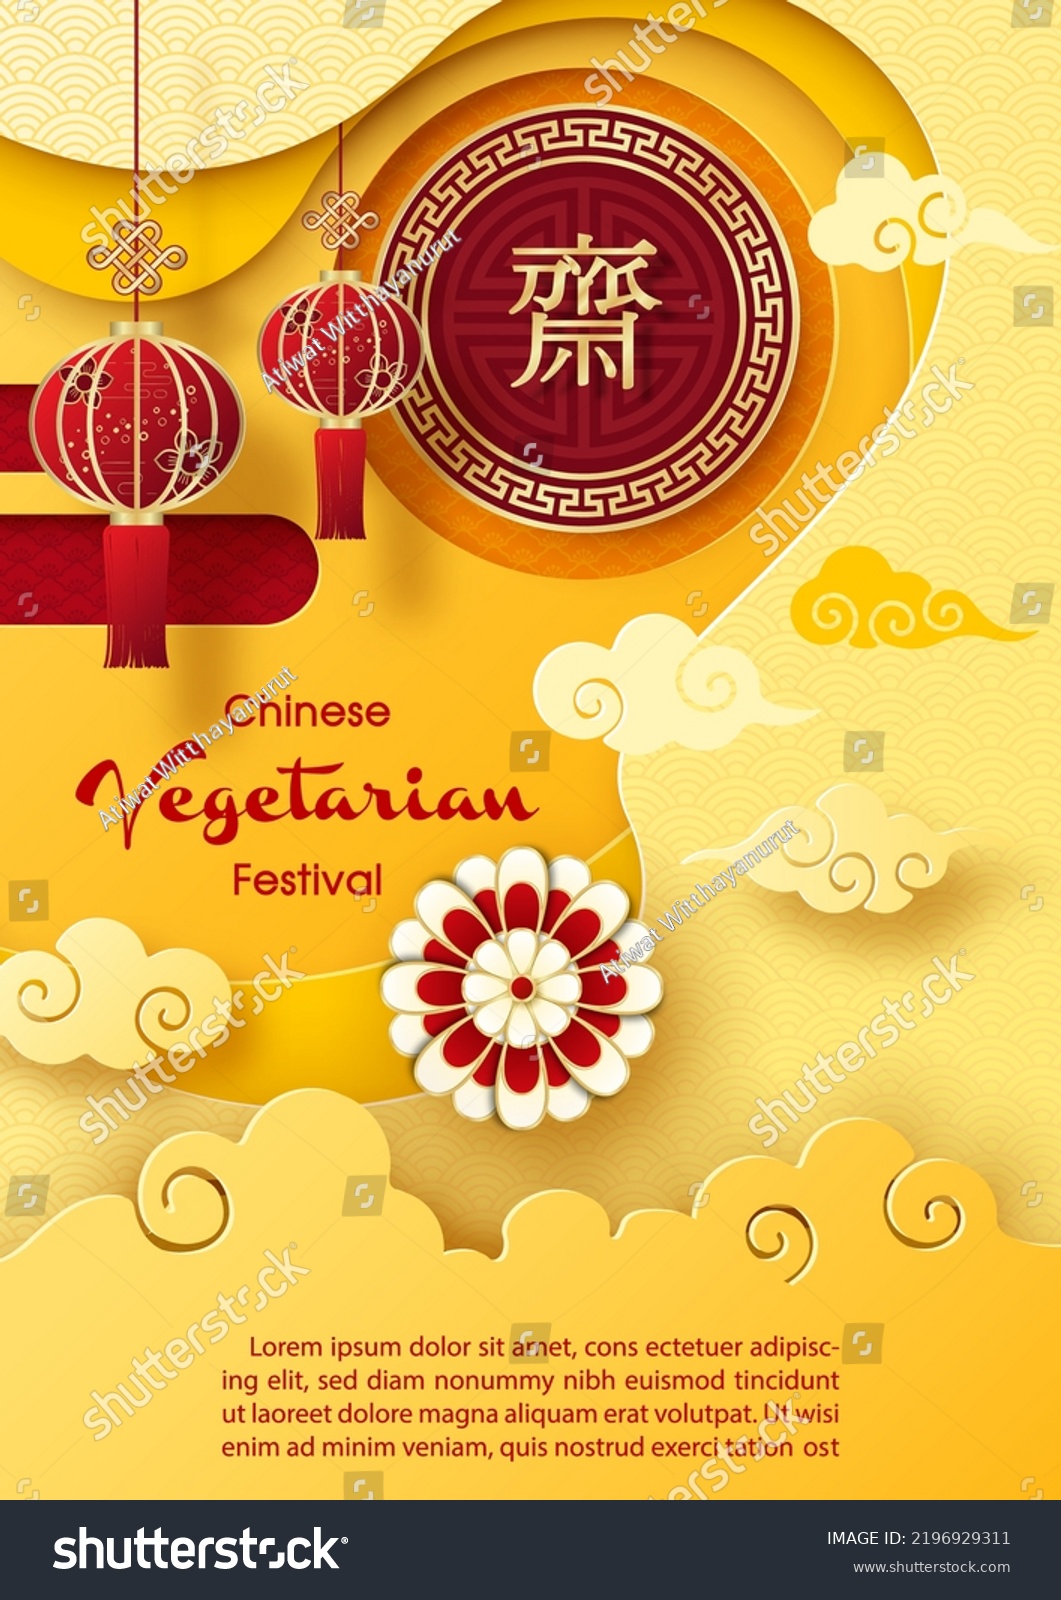 Greeting card and poster advertising of Chinese vegetarian festival in paper cut style and vector design. Golden Chinese letters is means "Fasting" for worship Buddha in English. #2196929311